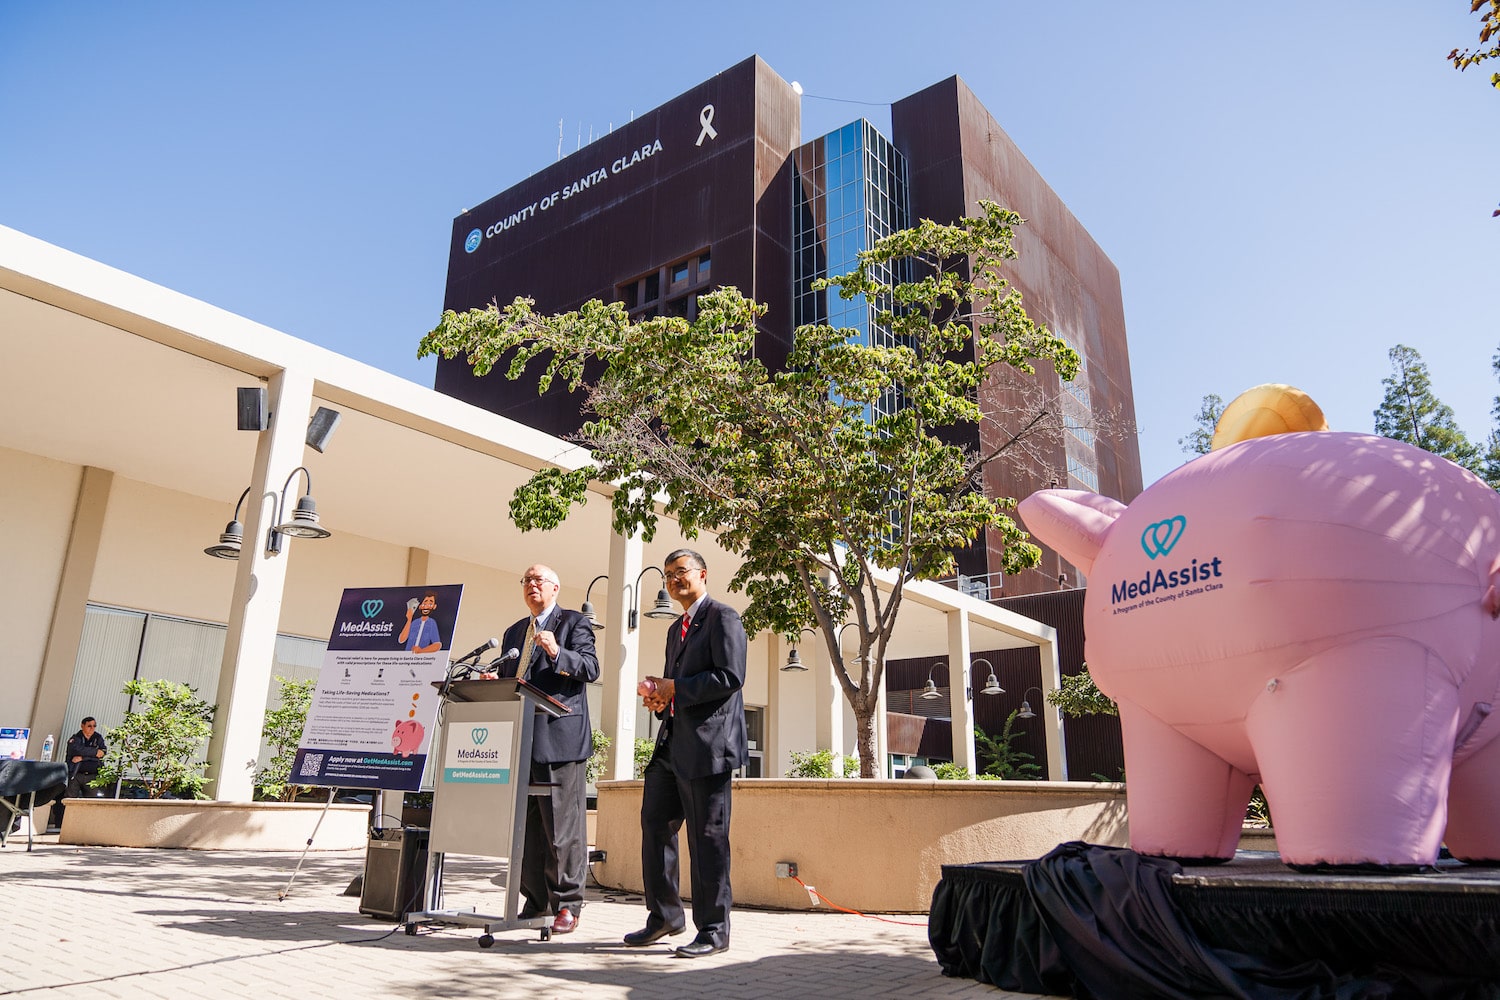 Photo of Supervisors Simitian and Lee with inflatable Piggy Bank to their right in front of the County Office Building of Santa Clara.